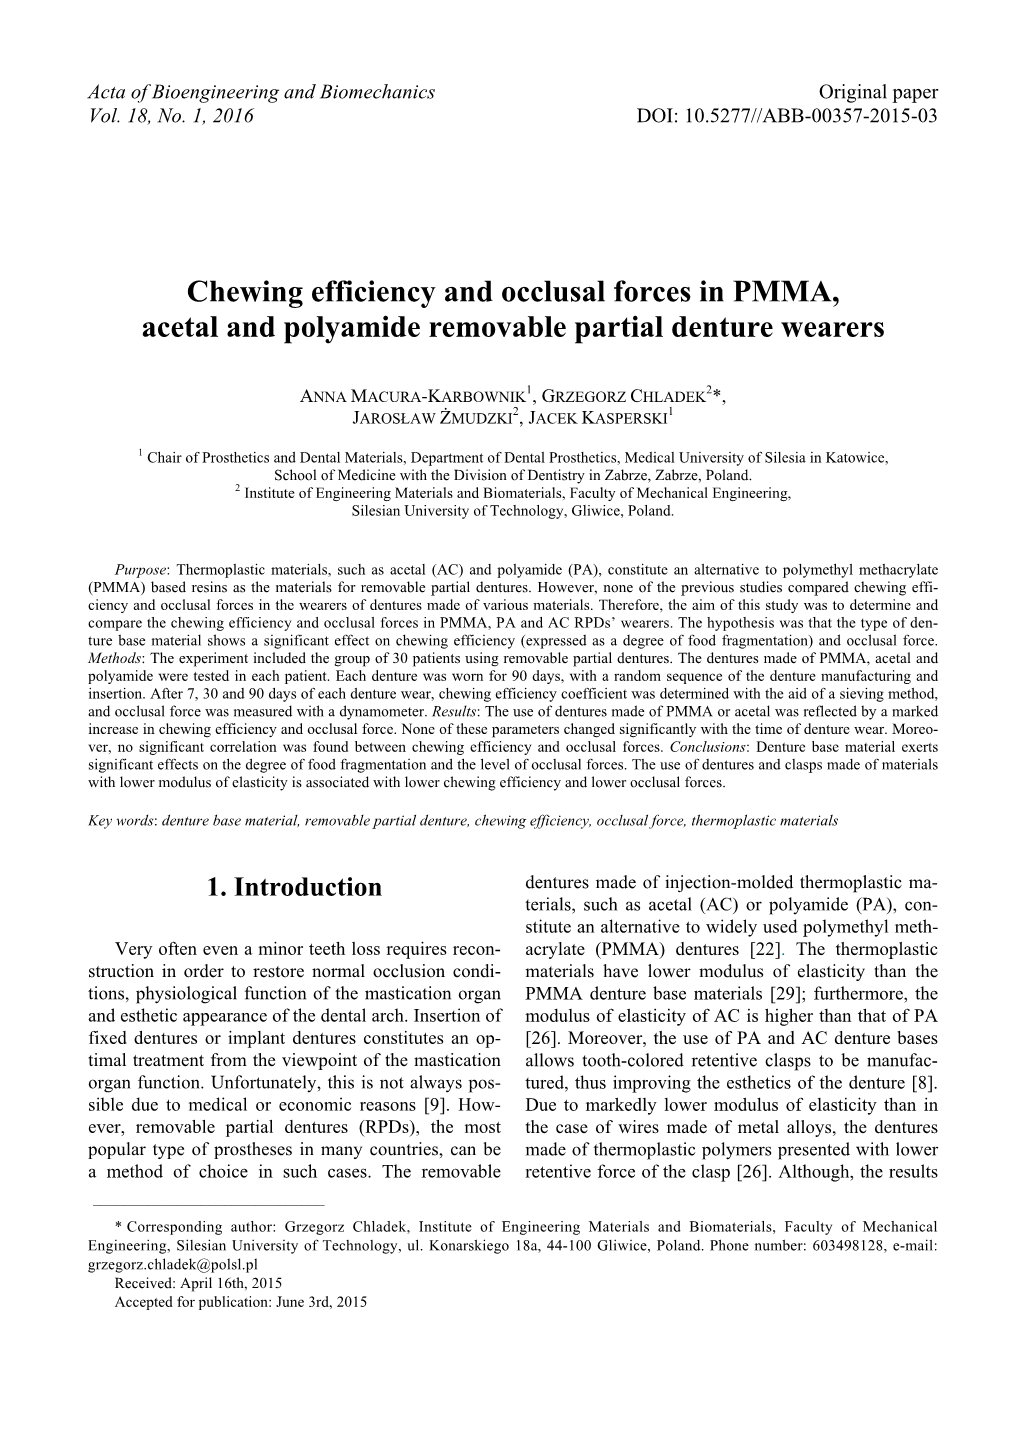 Chewing Efficiency and Occlusal Forces in PMMA, Acetal and Polyamide Removable Partial Denture Wearers